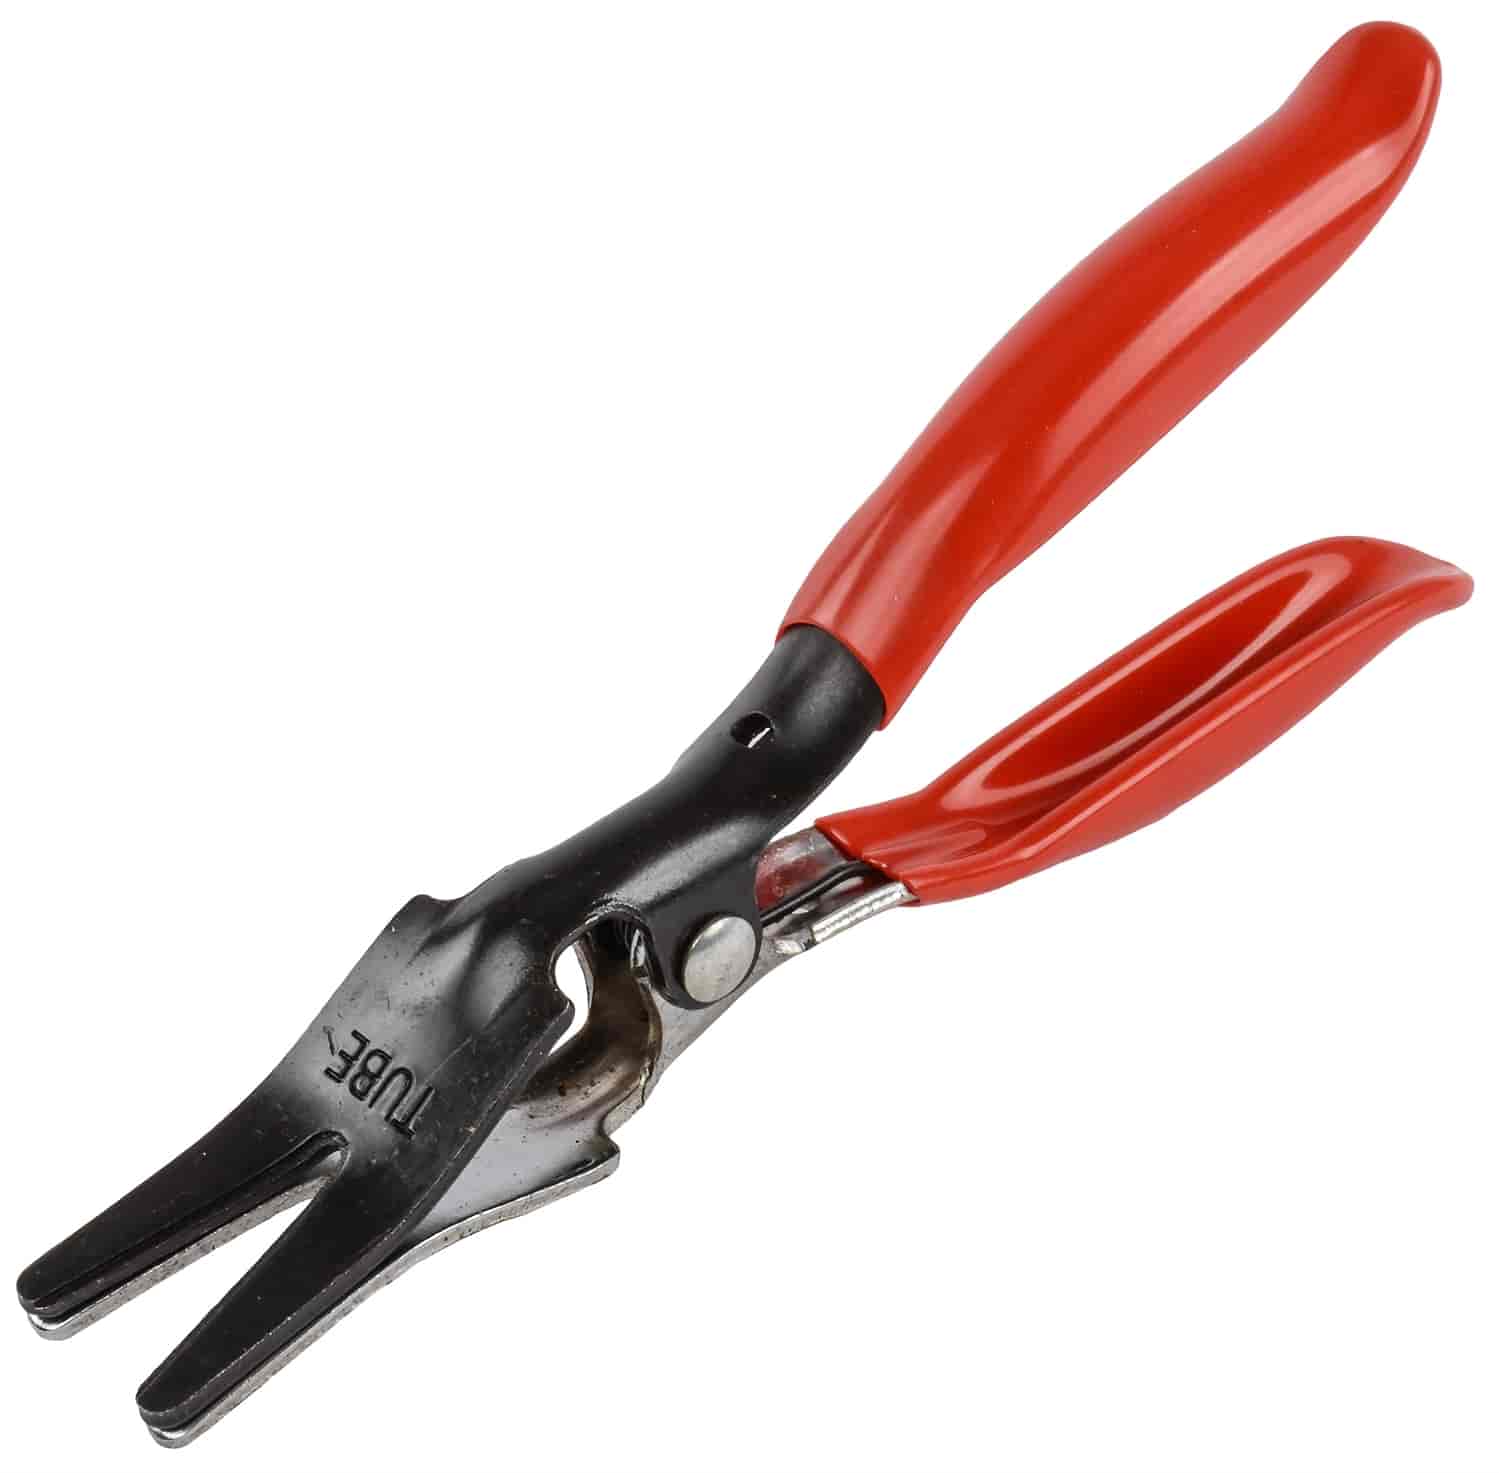 Hose Removal Pliers for 5/32 in. to 1/2 in. Hose